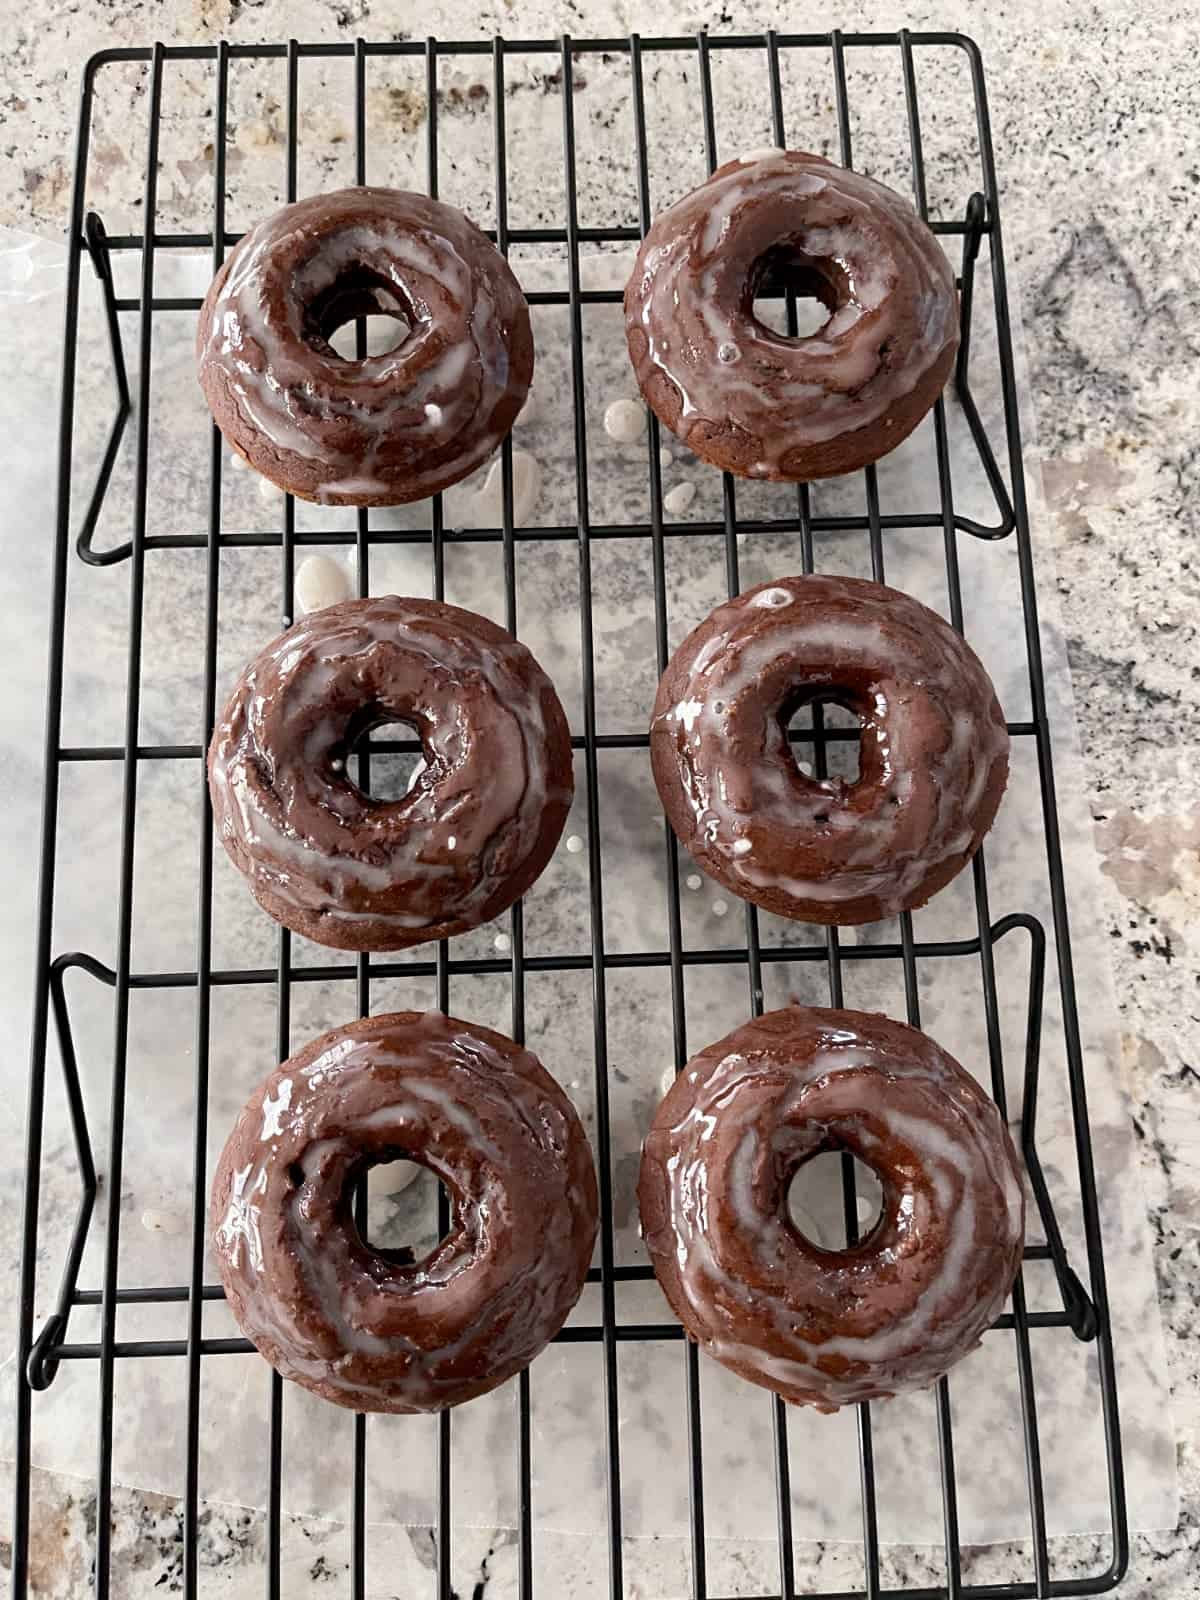 Mint chocolate glazed donuts on cooling rack.